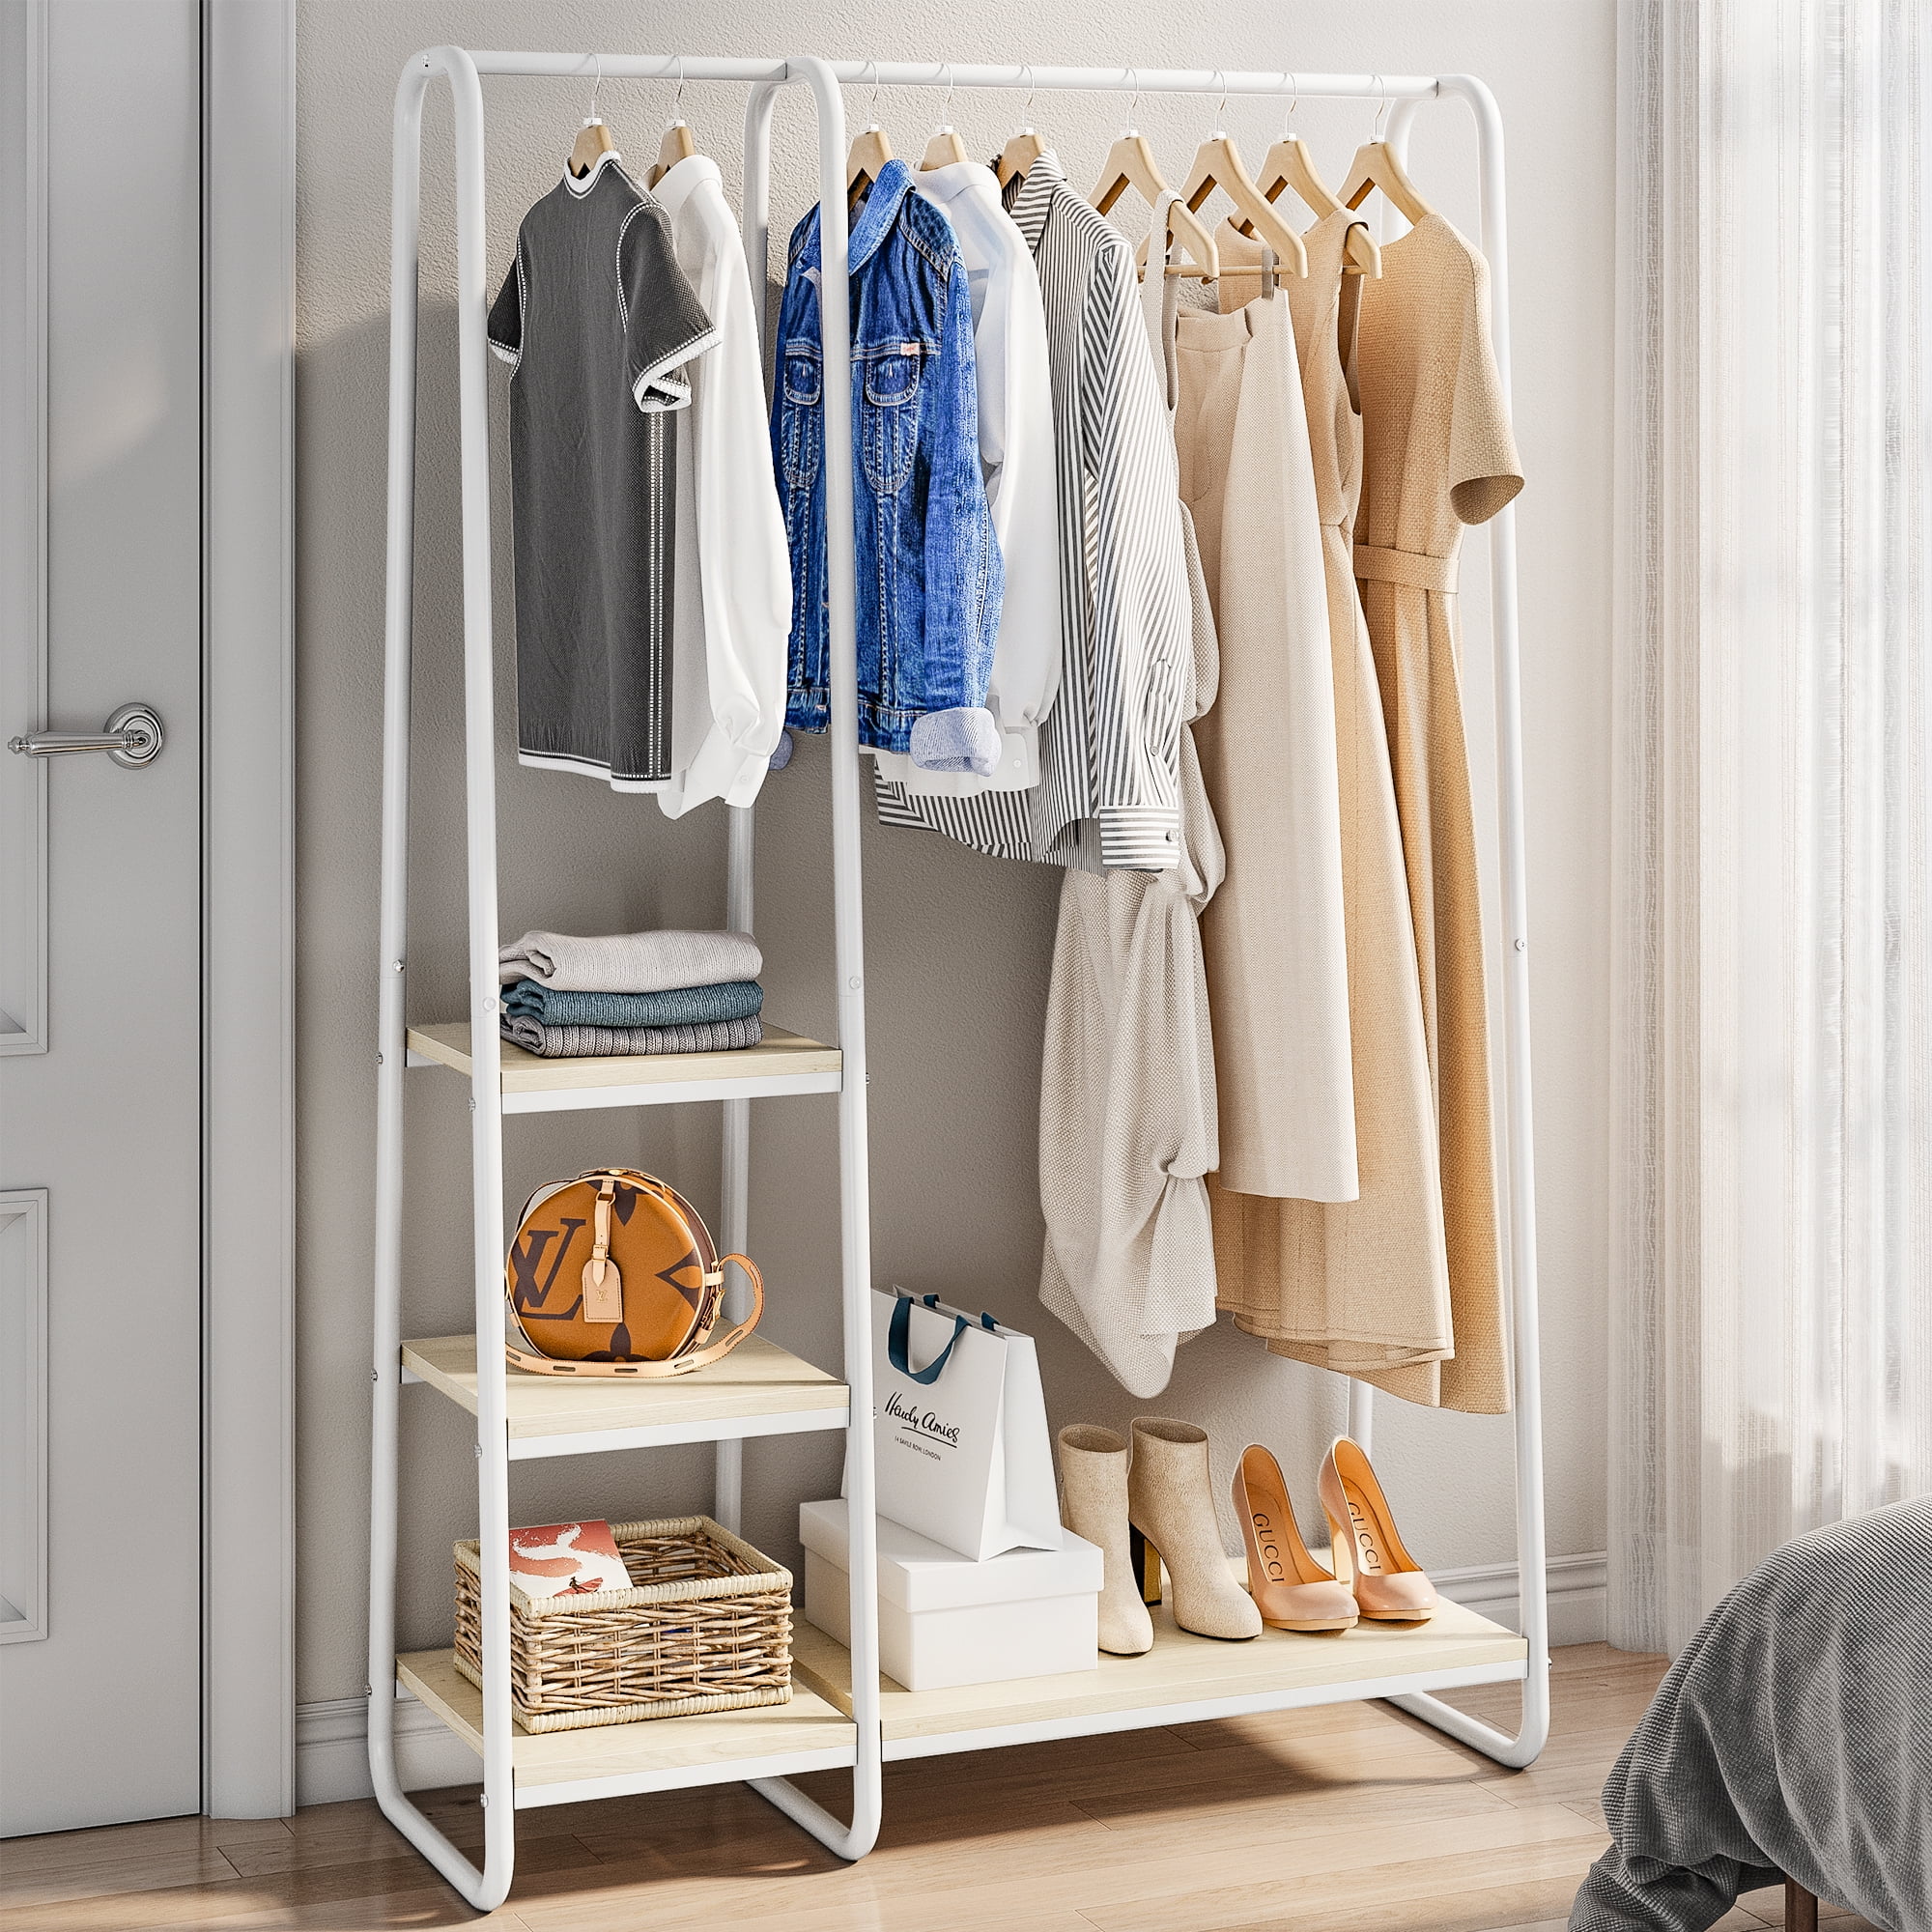 Buy Raybee Stylish White Clothing Rack for Hanging Clothes, Garment ...